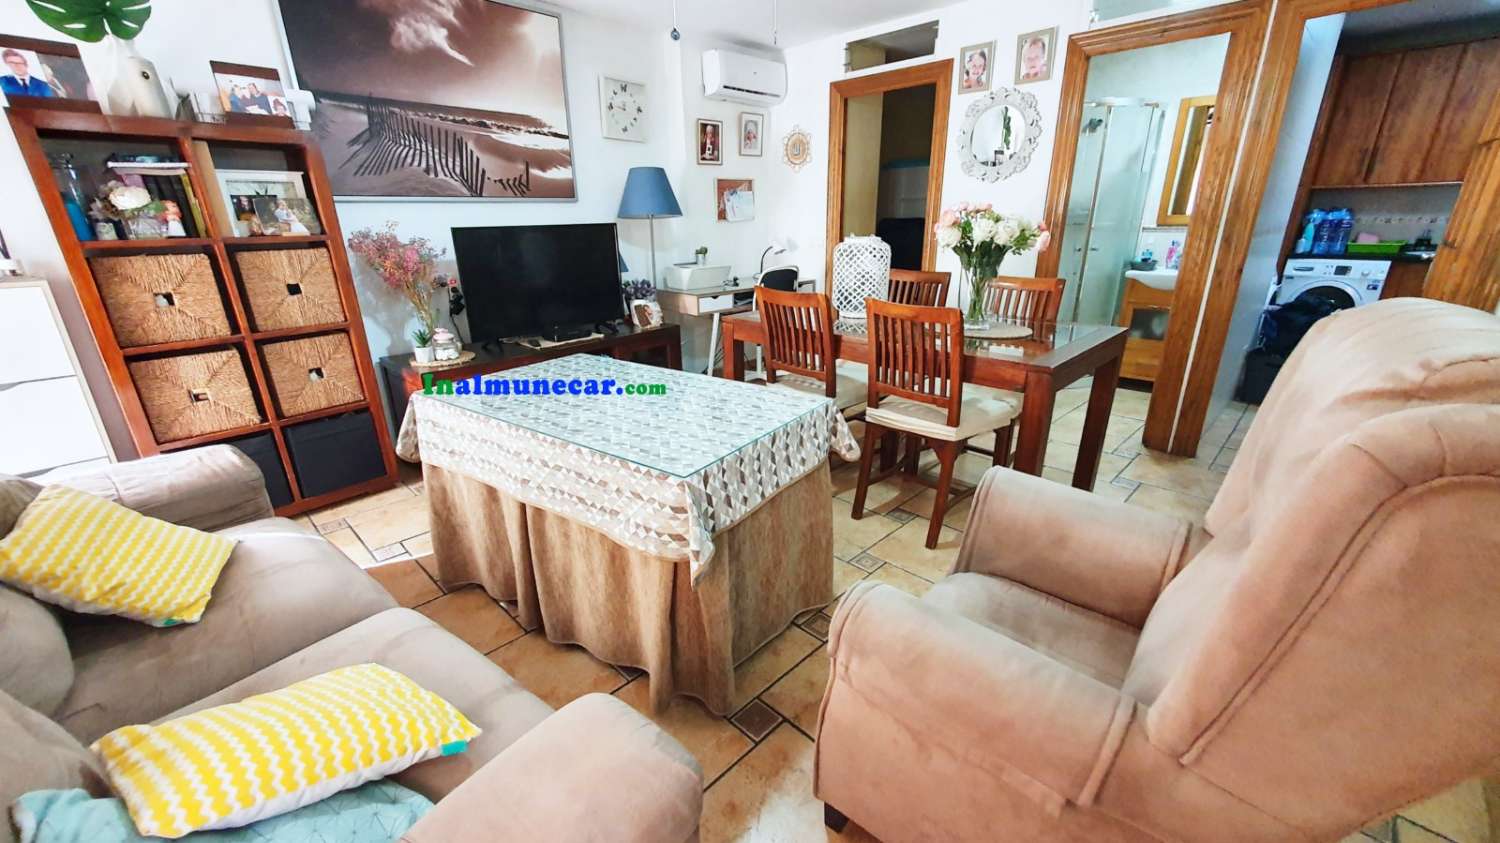 House for sale in Almuñécar with commercial premises in the centre of town.